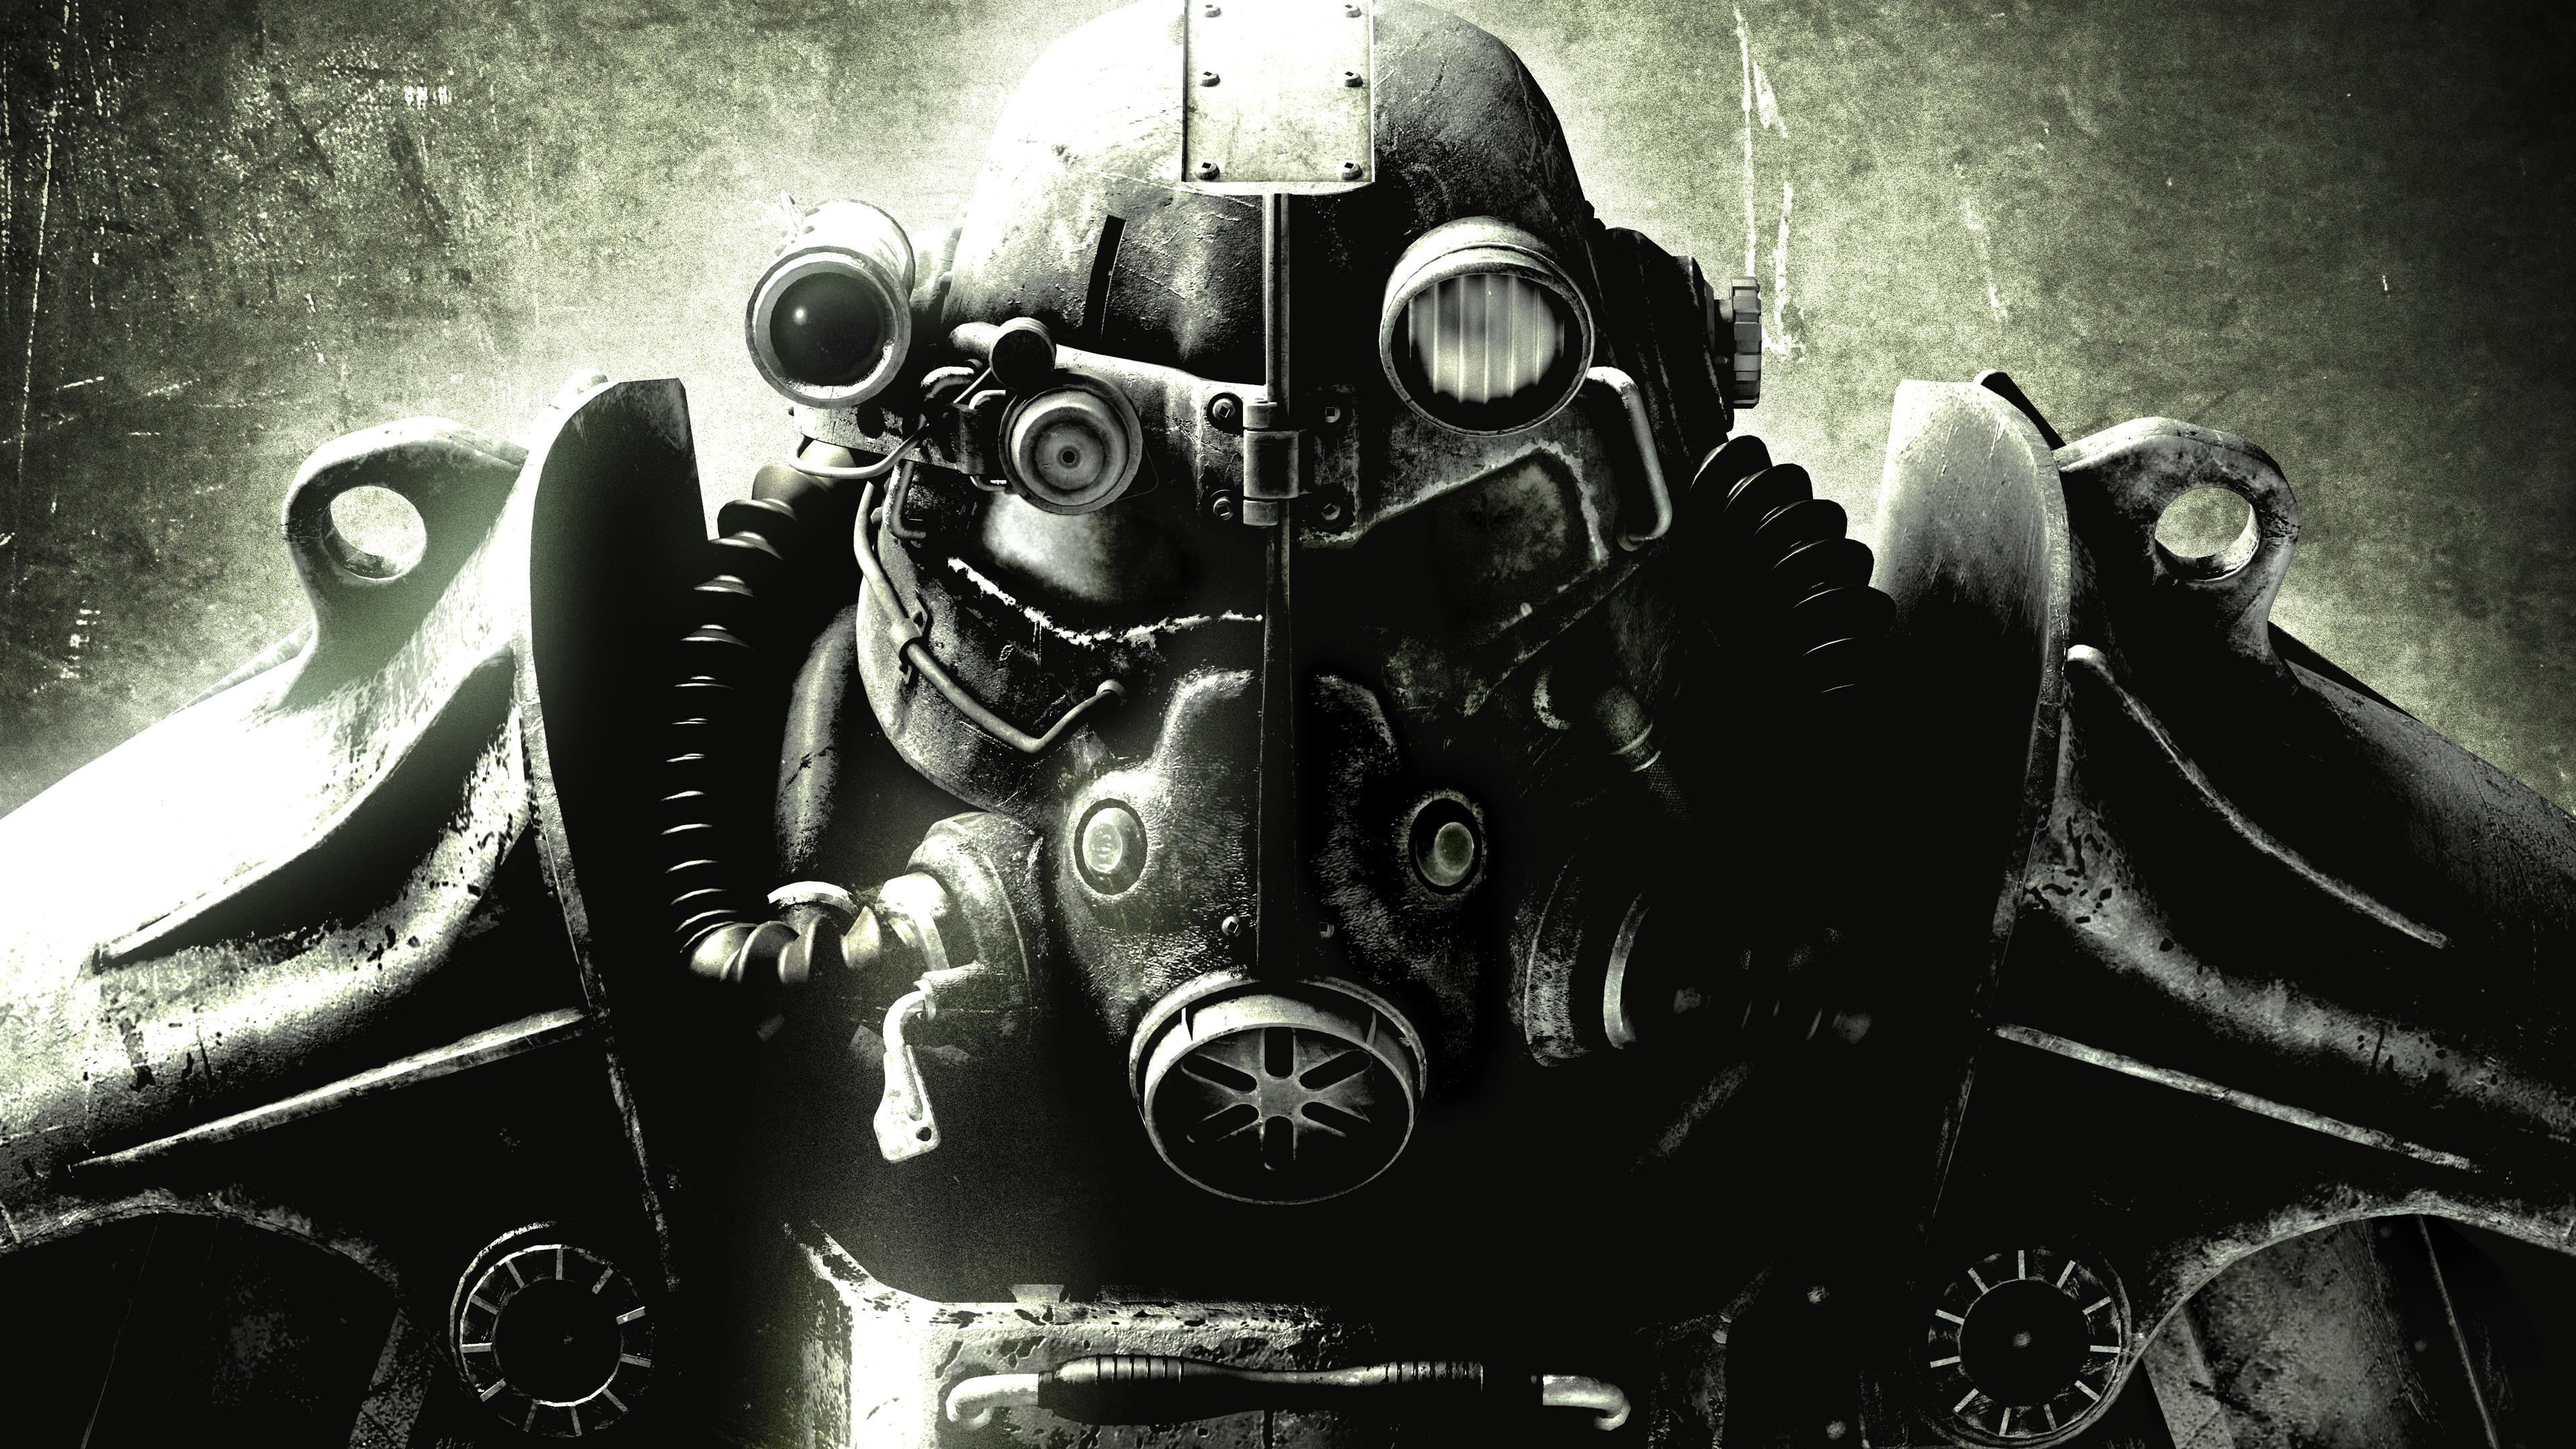 Fallout 3 Finally Freed From Games For Windows Live Scourge thumbnail